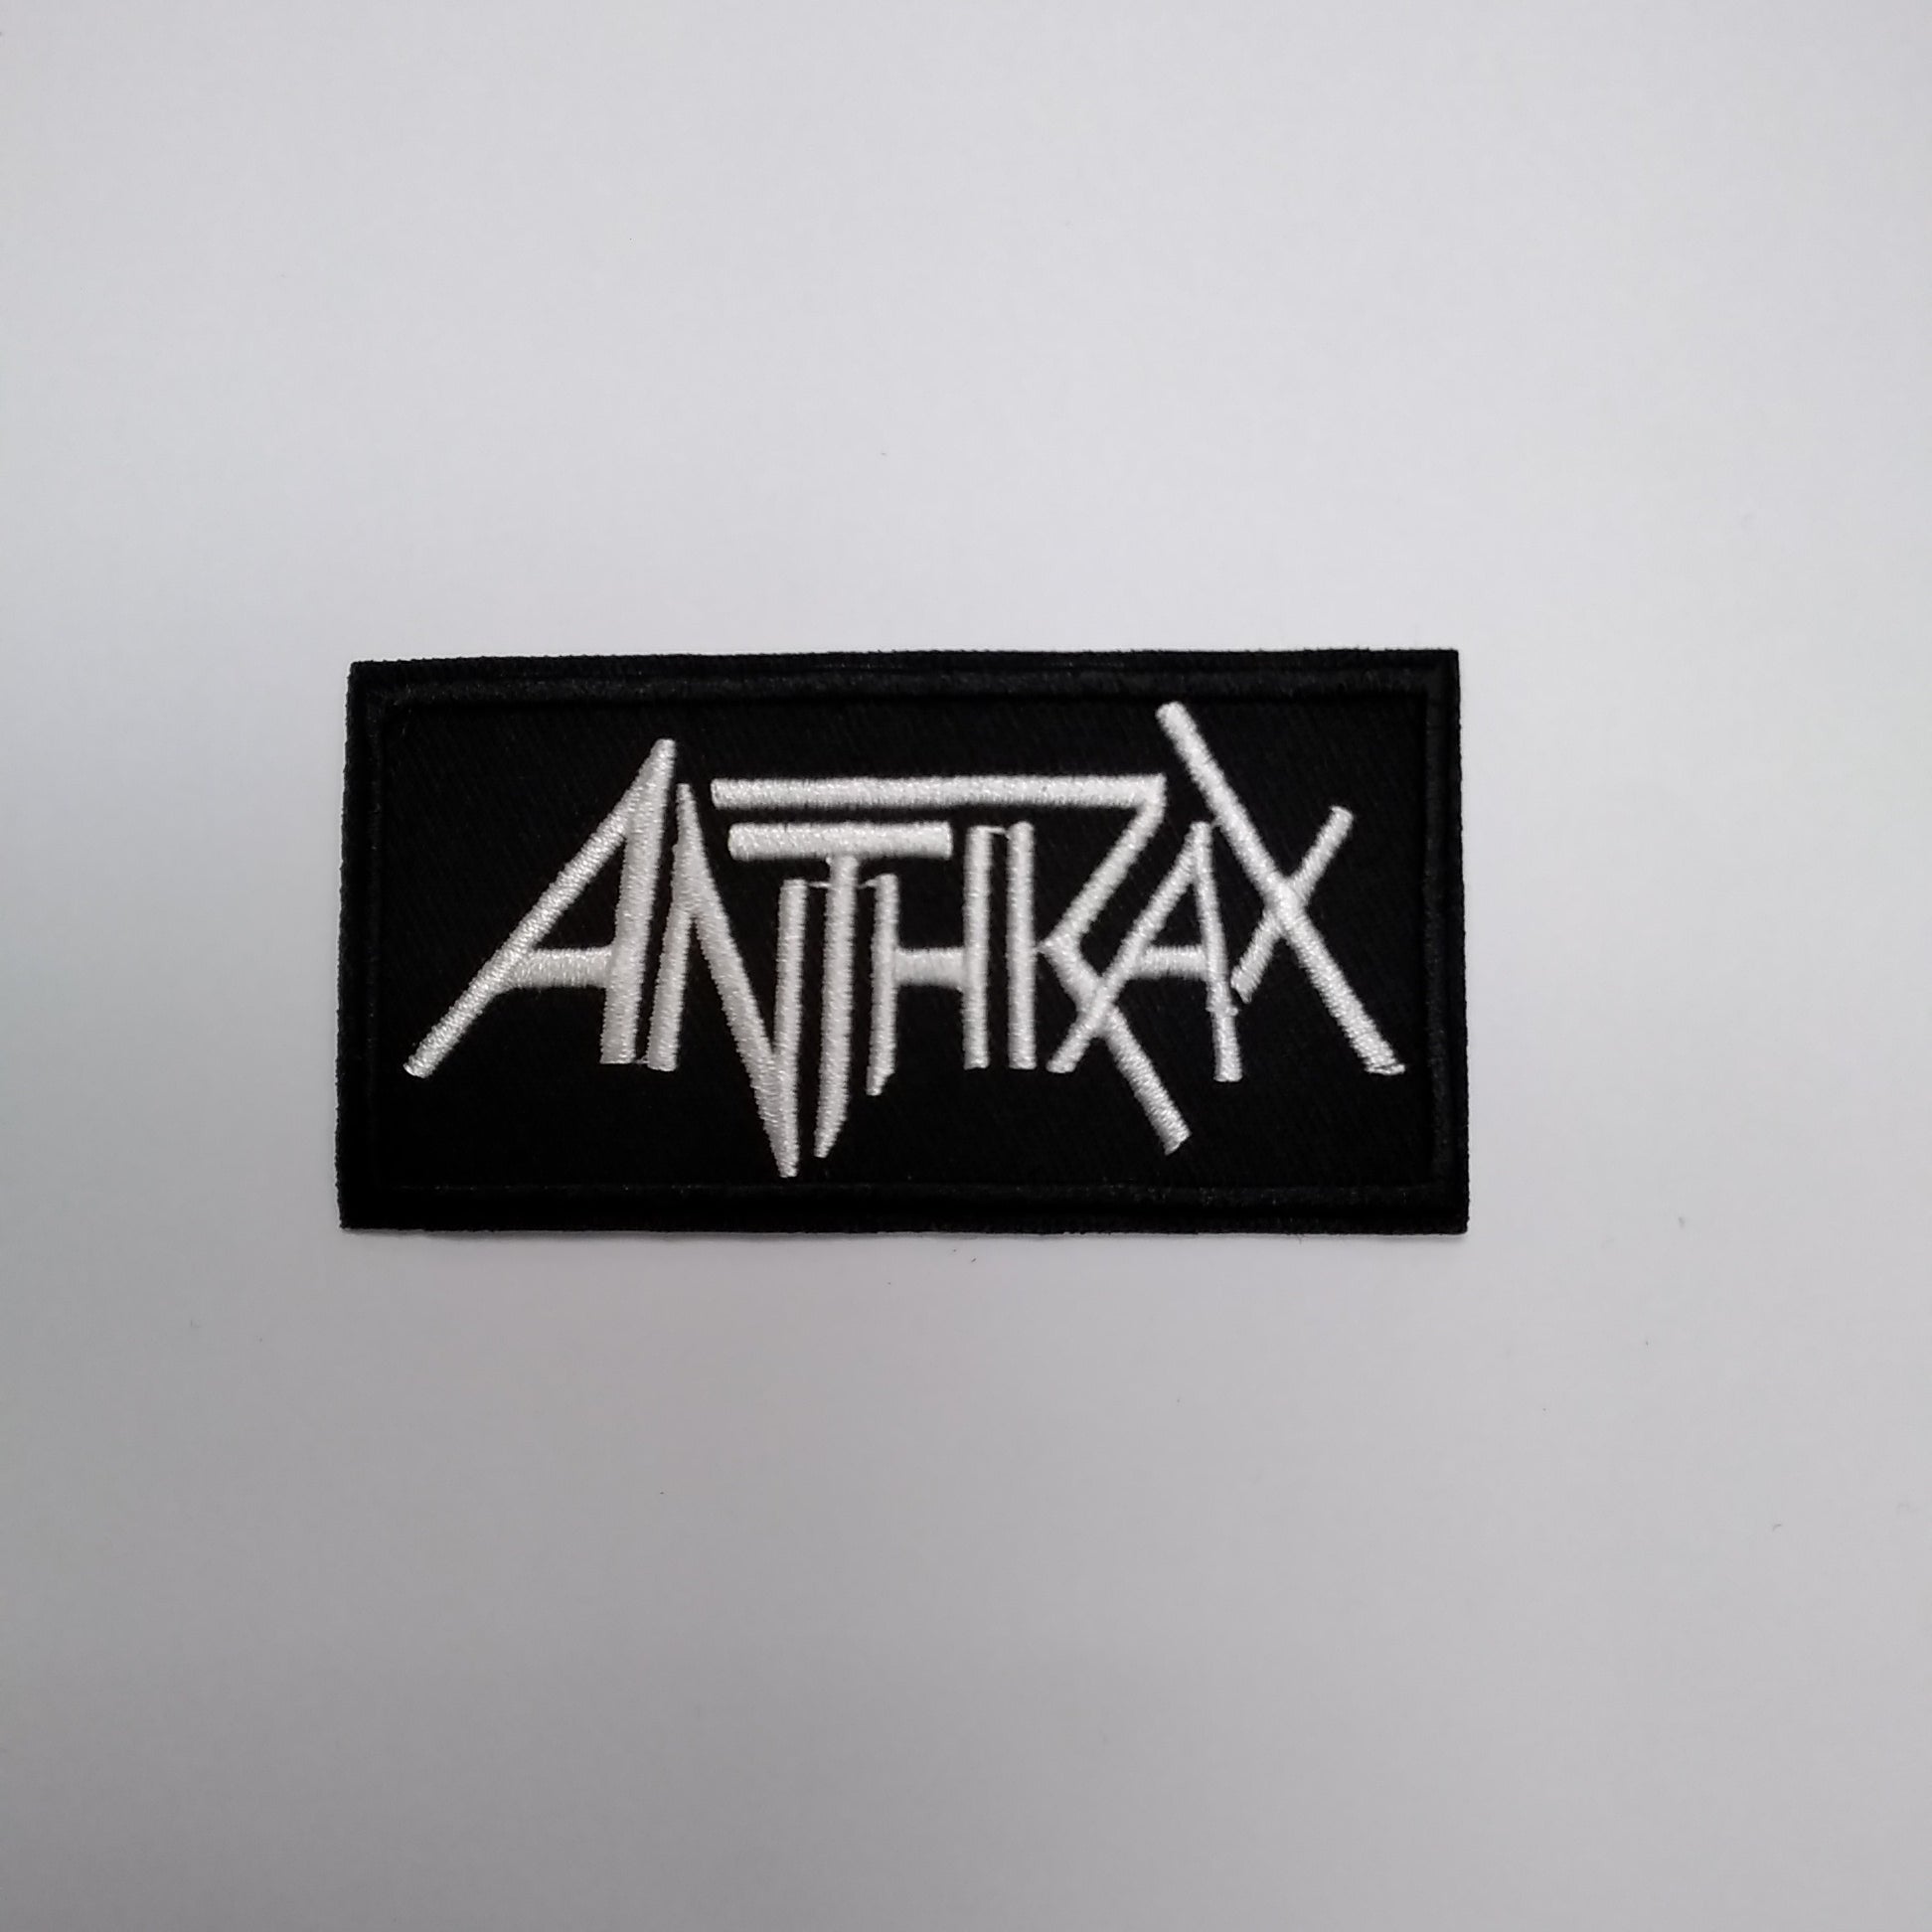 anthrax patch, does anyone know where i could find one or is